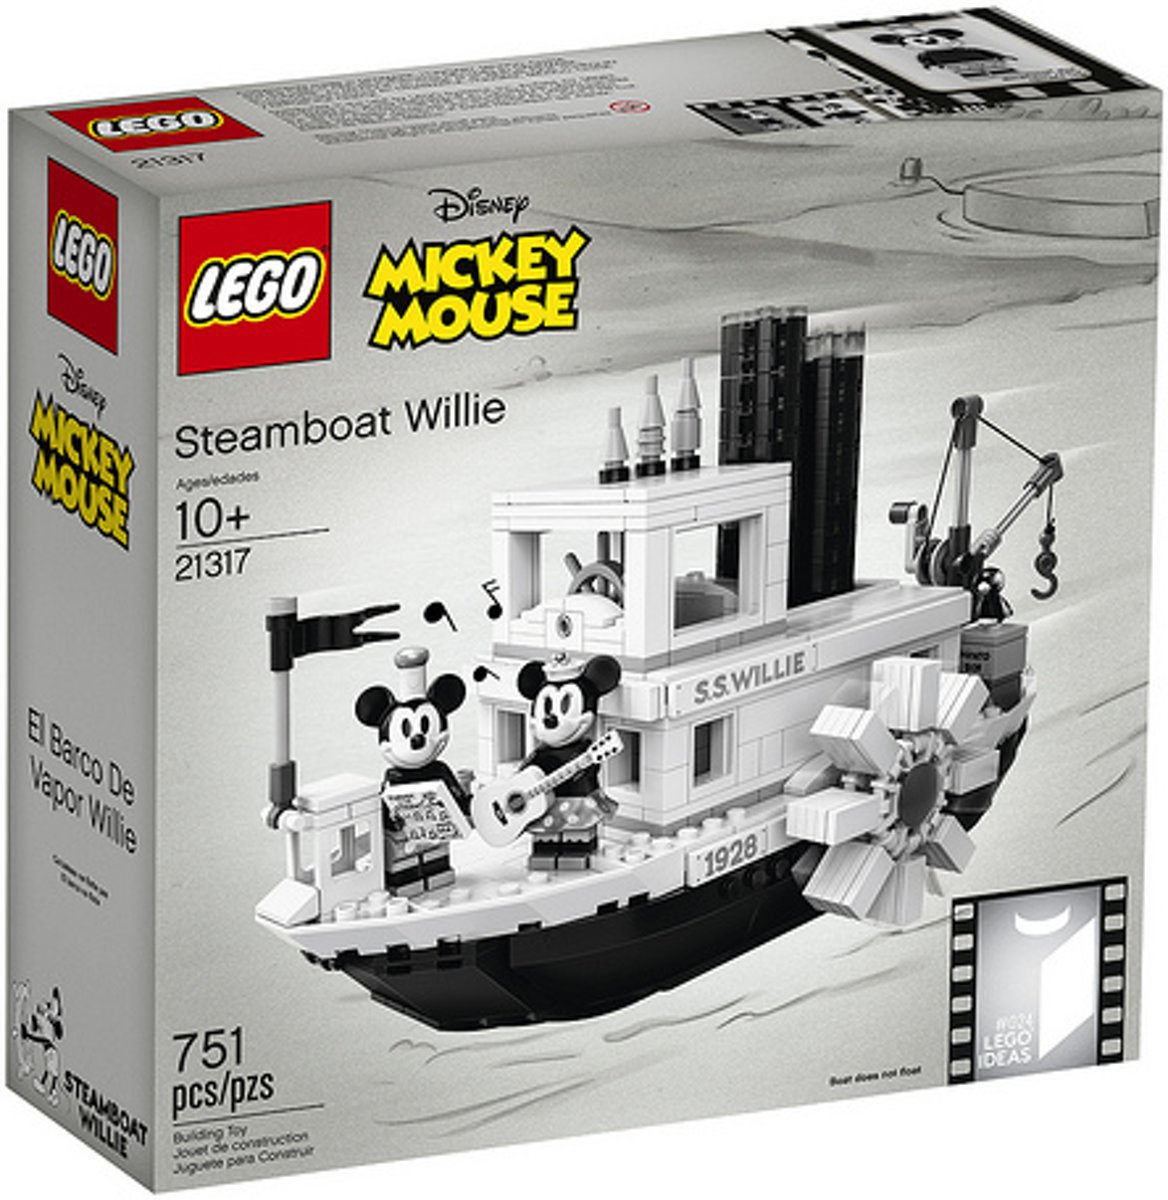 LEGO - Steamboat Willie (21317)